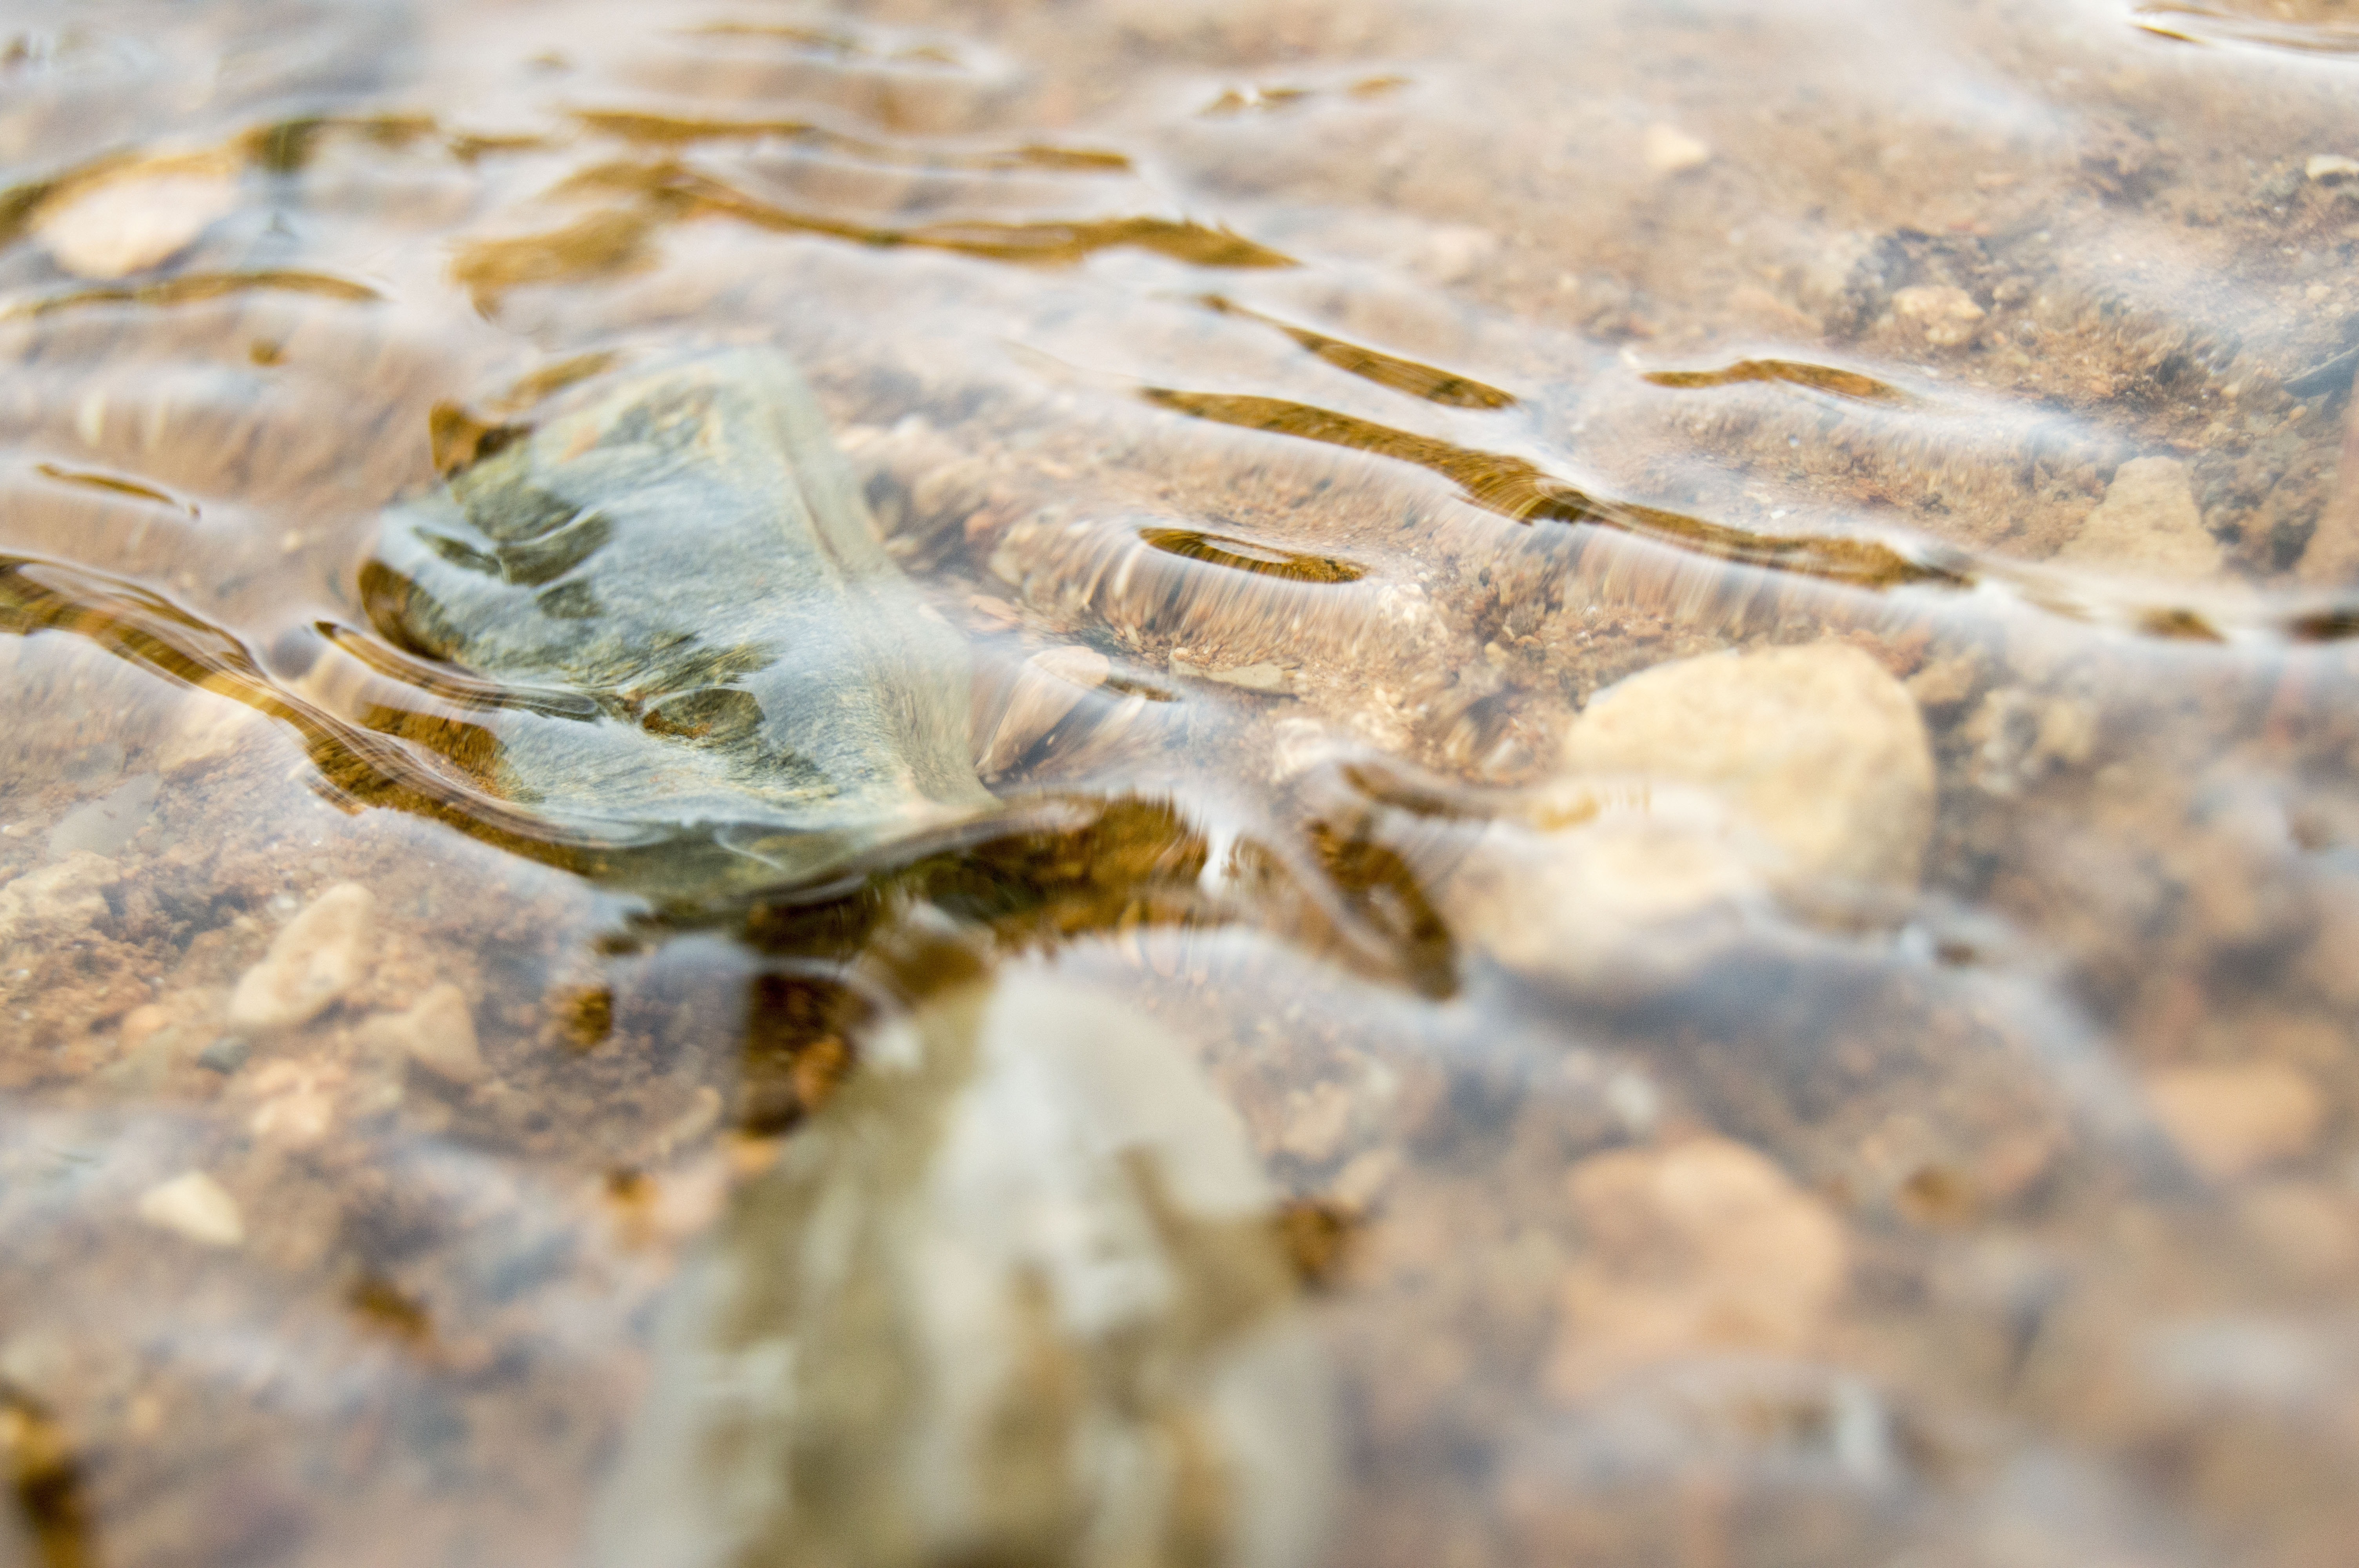 Movement, River, Stones, Current, Water, one animal, reptile free image ...